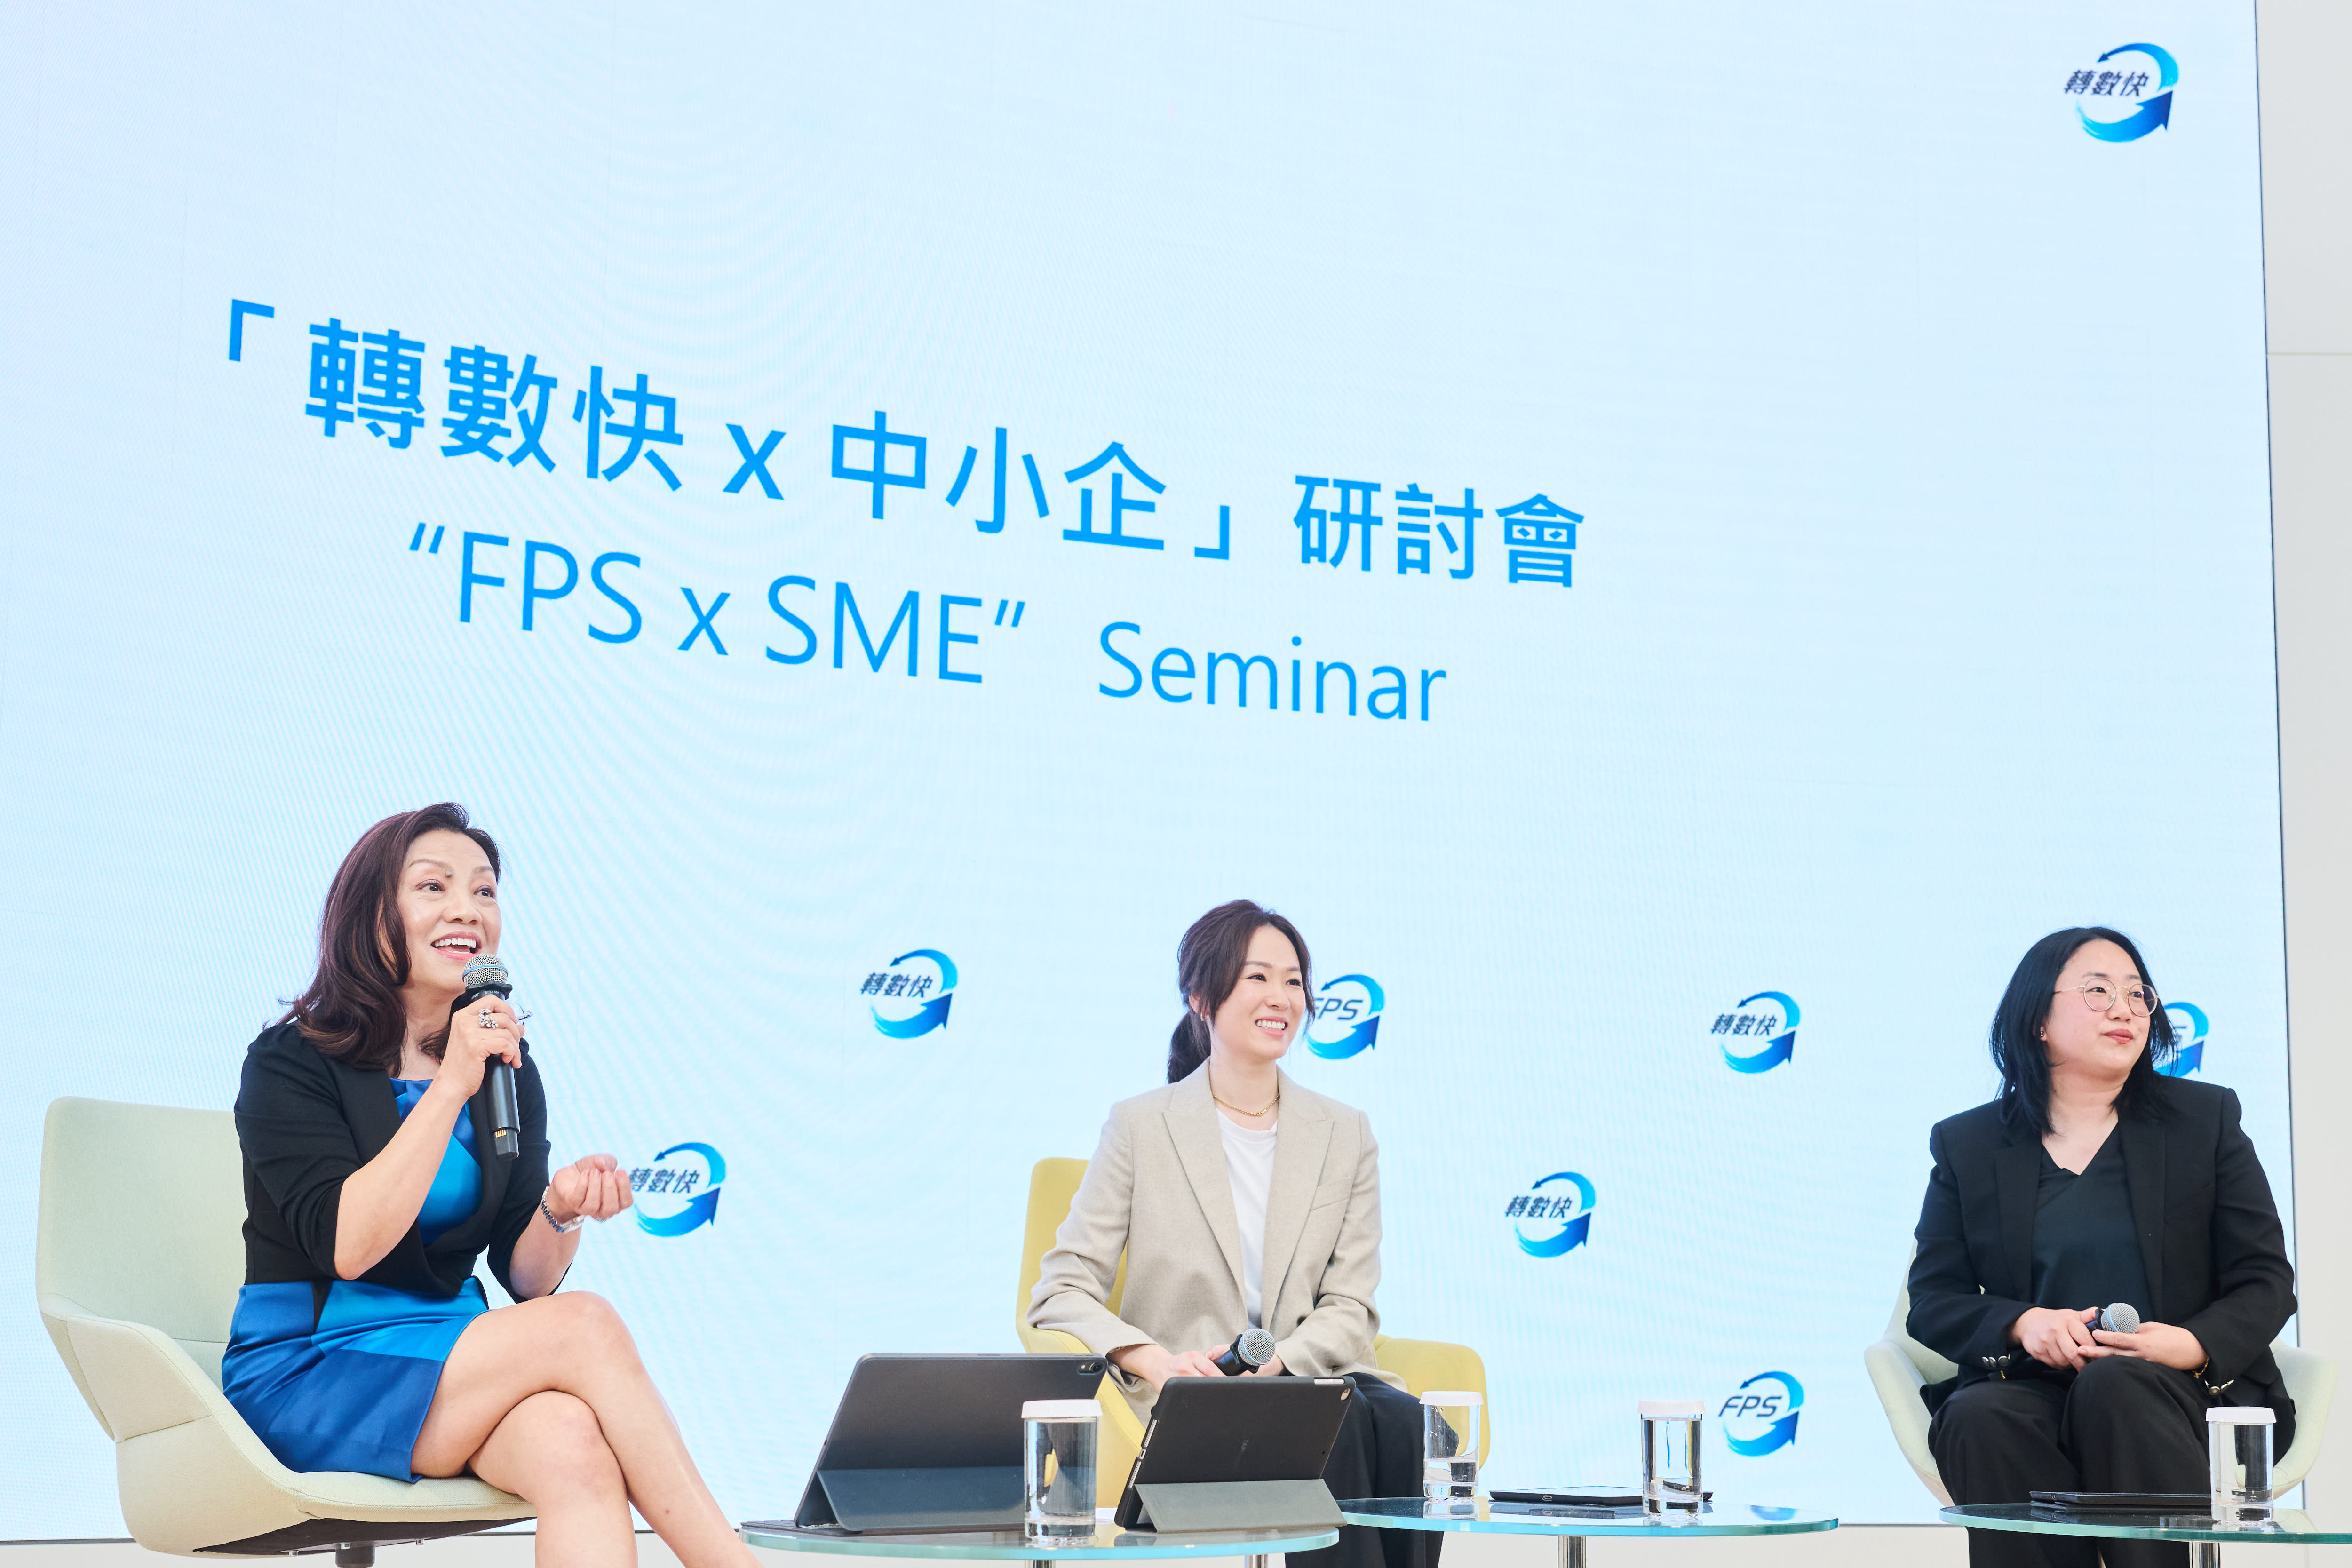 Representatives of two small and medium-sized enterprises, Ms Eva Fung, Co-founder of Cookieism (second from right), and Ms Ivy Tse, Co-Chief Executive Officer & Co-founder of FreightAmigo (first from right) share their experience of using Faster Payment System at the seminar. This session is hosted by Ms Haster Tang (first from left), the Chief Executive Officer of the Hong Kong Interbank Clearing Limited.